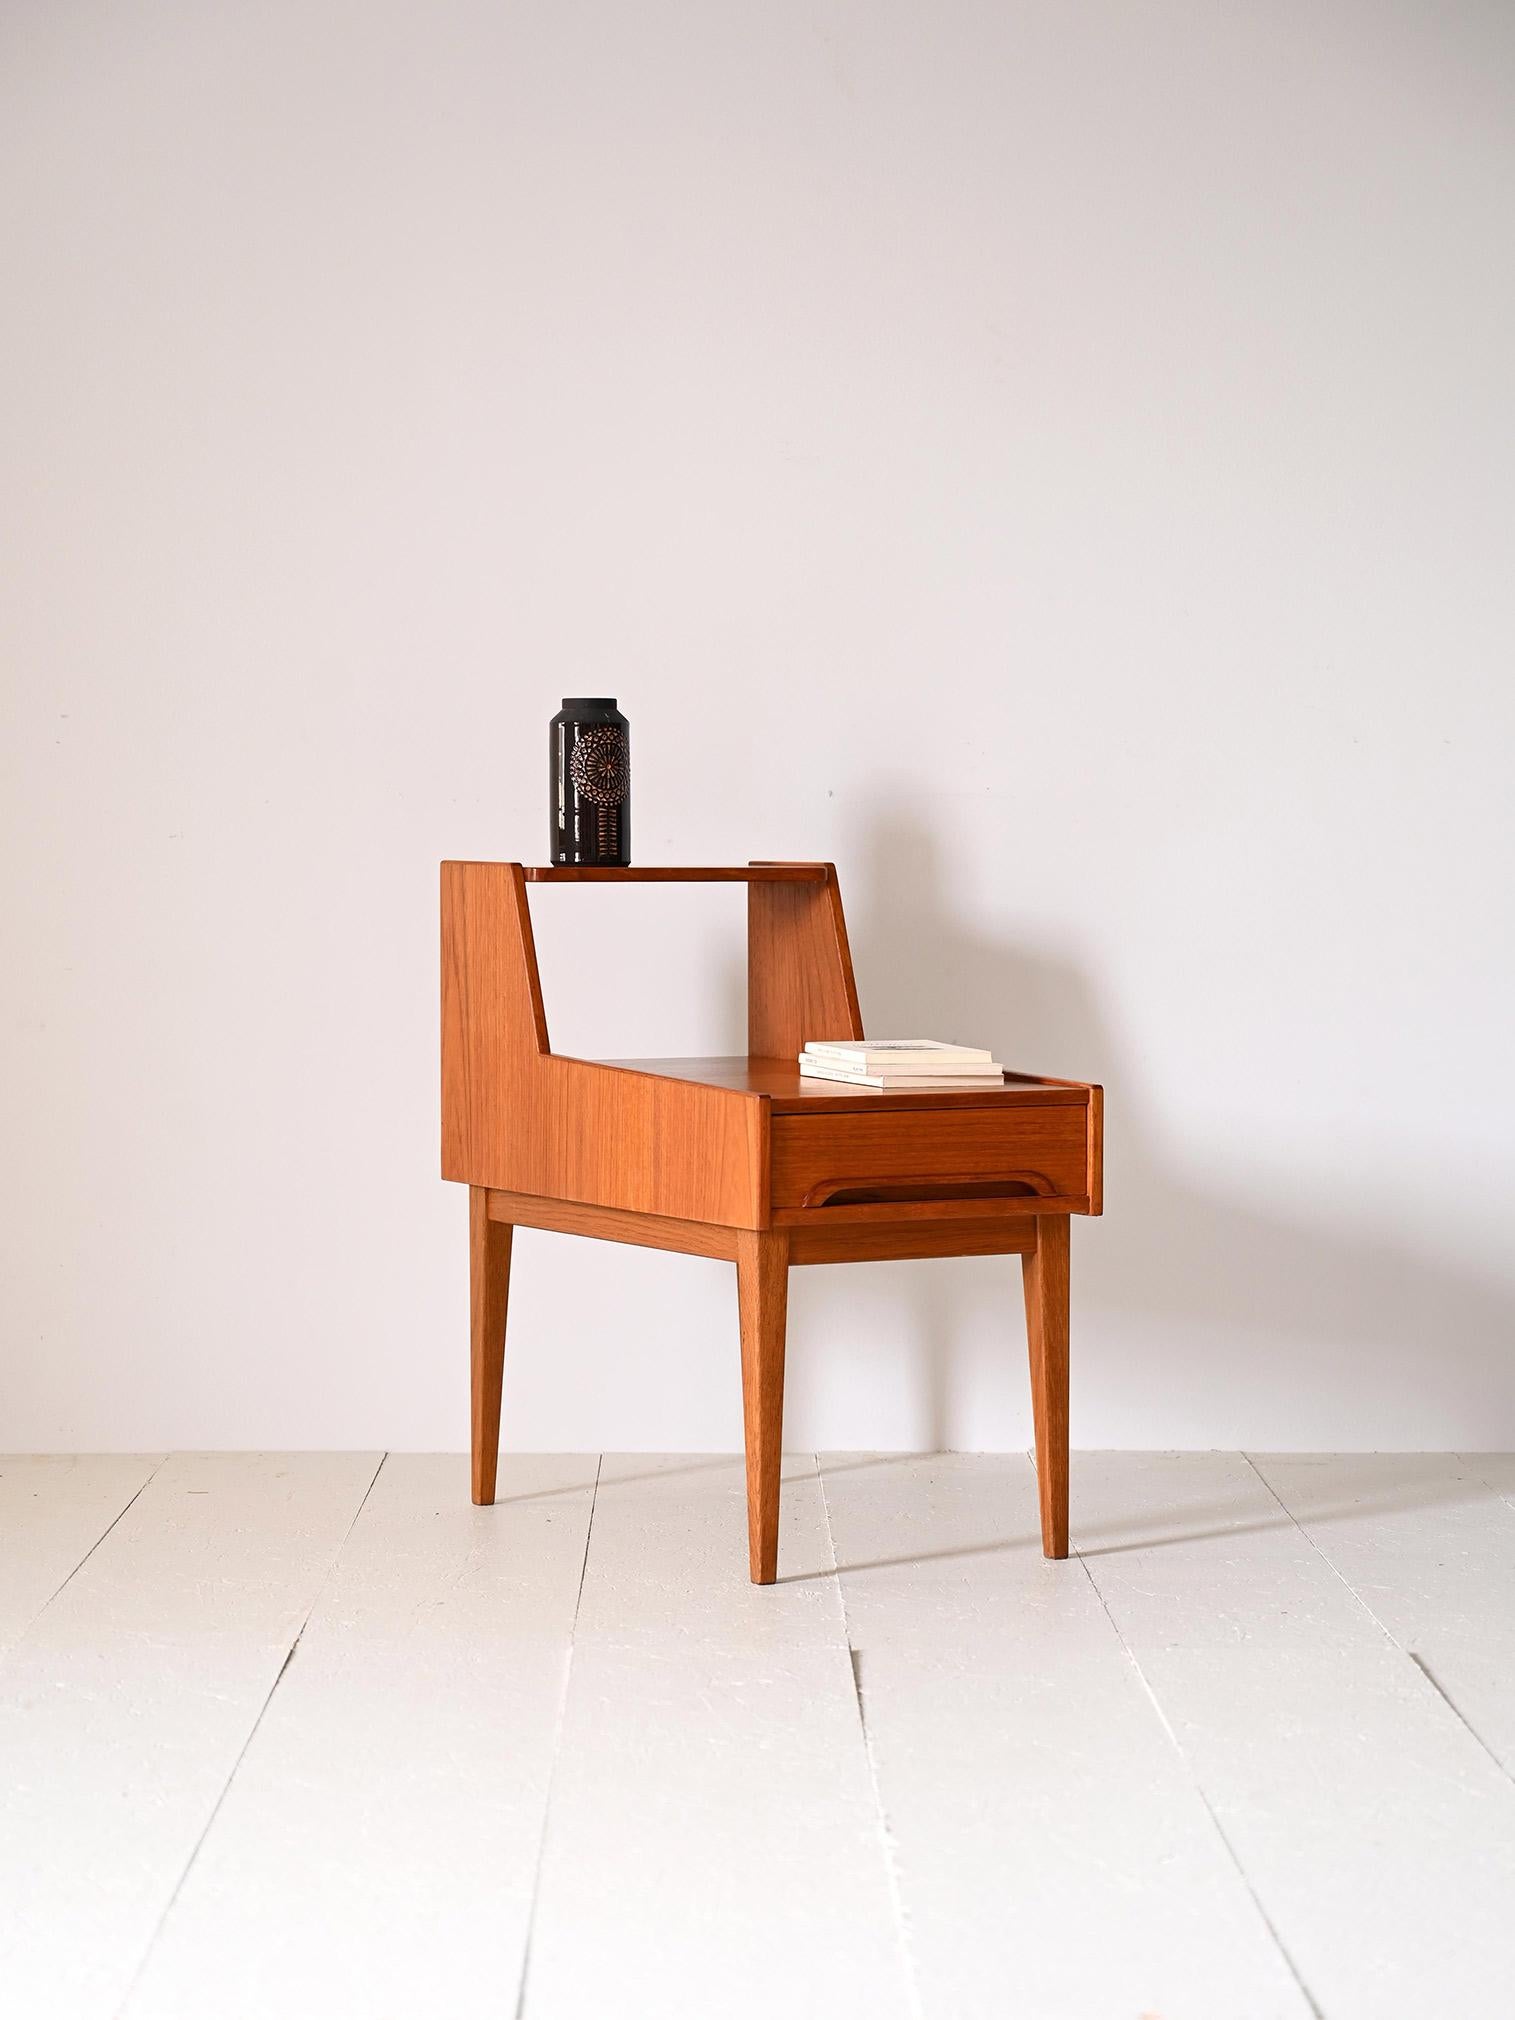 Scandinavian teak nightstand with drawer.

Particular piece of Swedish modernism from the 1960s consisting of a double shelf. There is a convenient drawer with a carved wooden handle.
Tapered legs slender the figure and recall the square, bold